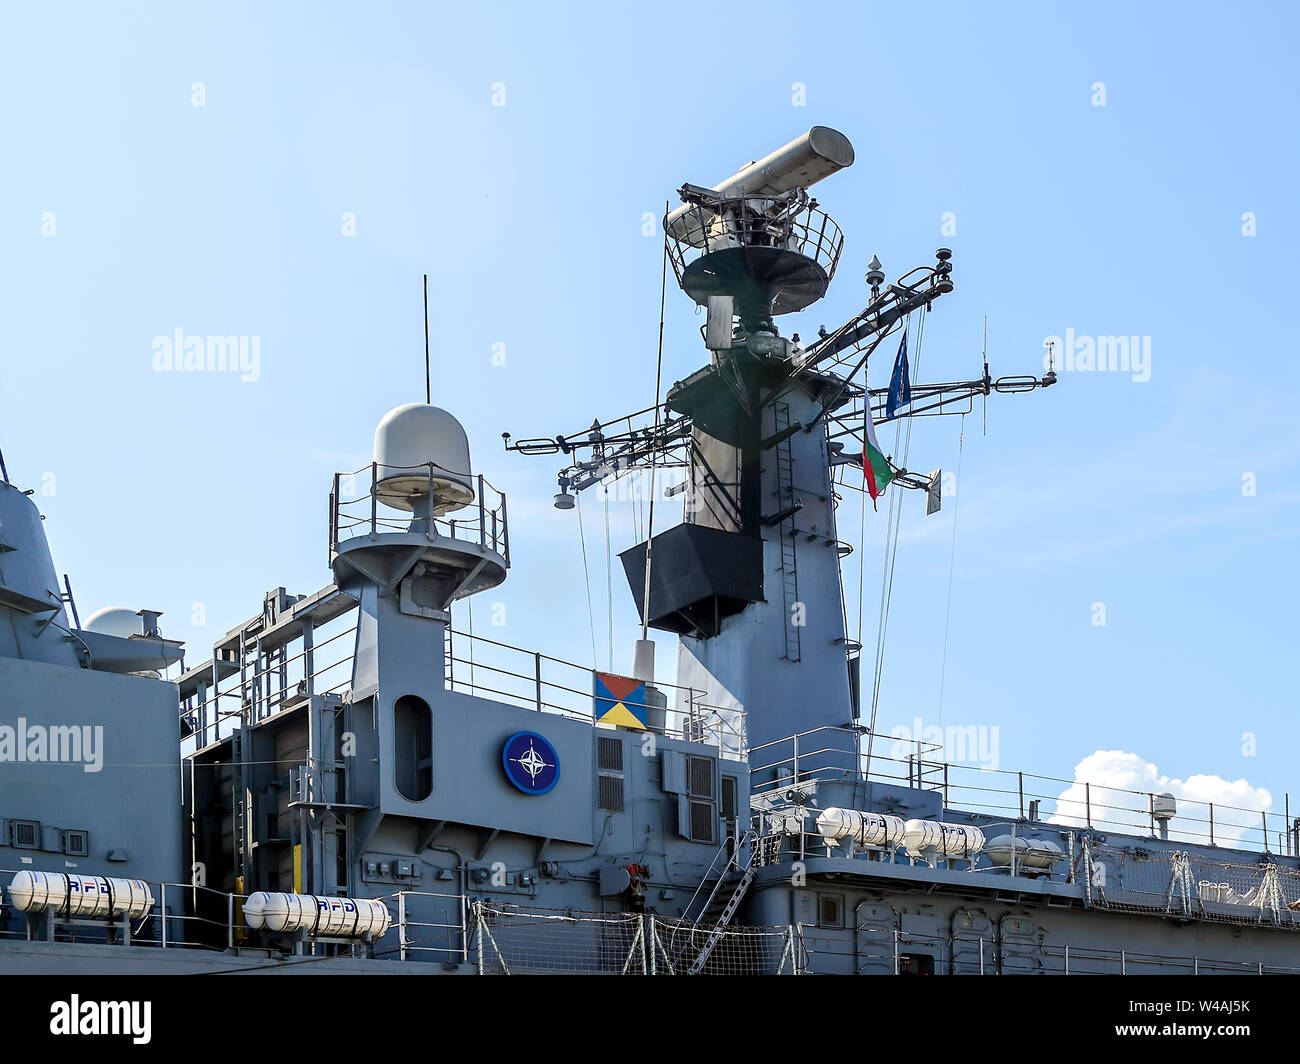 Varna, Bulgaria, July 20, 2019. Fragment of a large gray modern warship with radars and weapons and the blue NATO logo on its side. Stock Photo